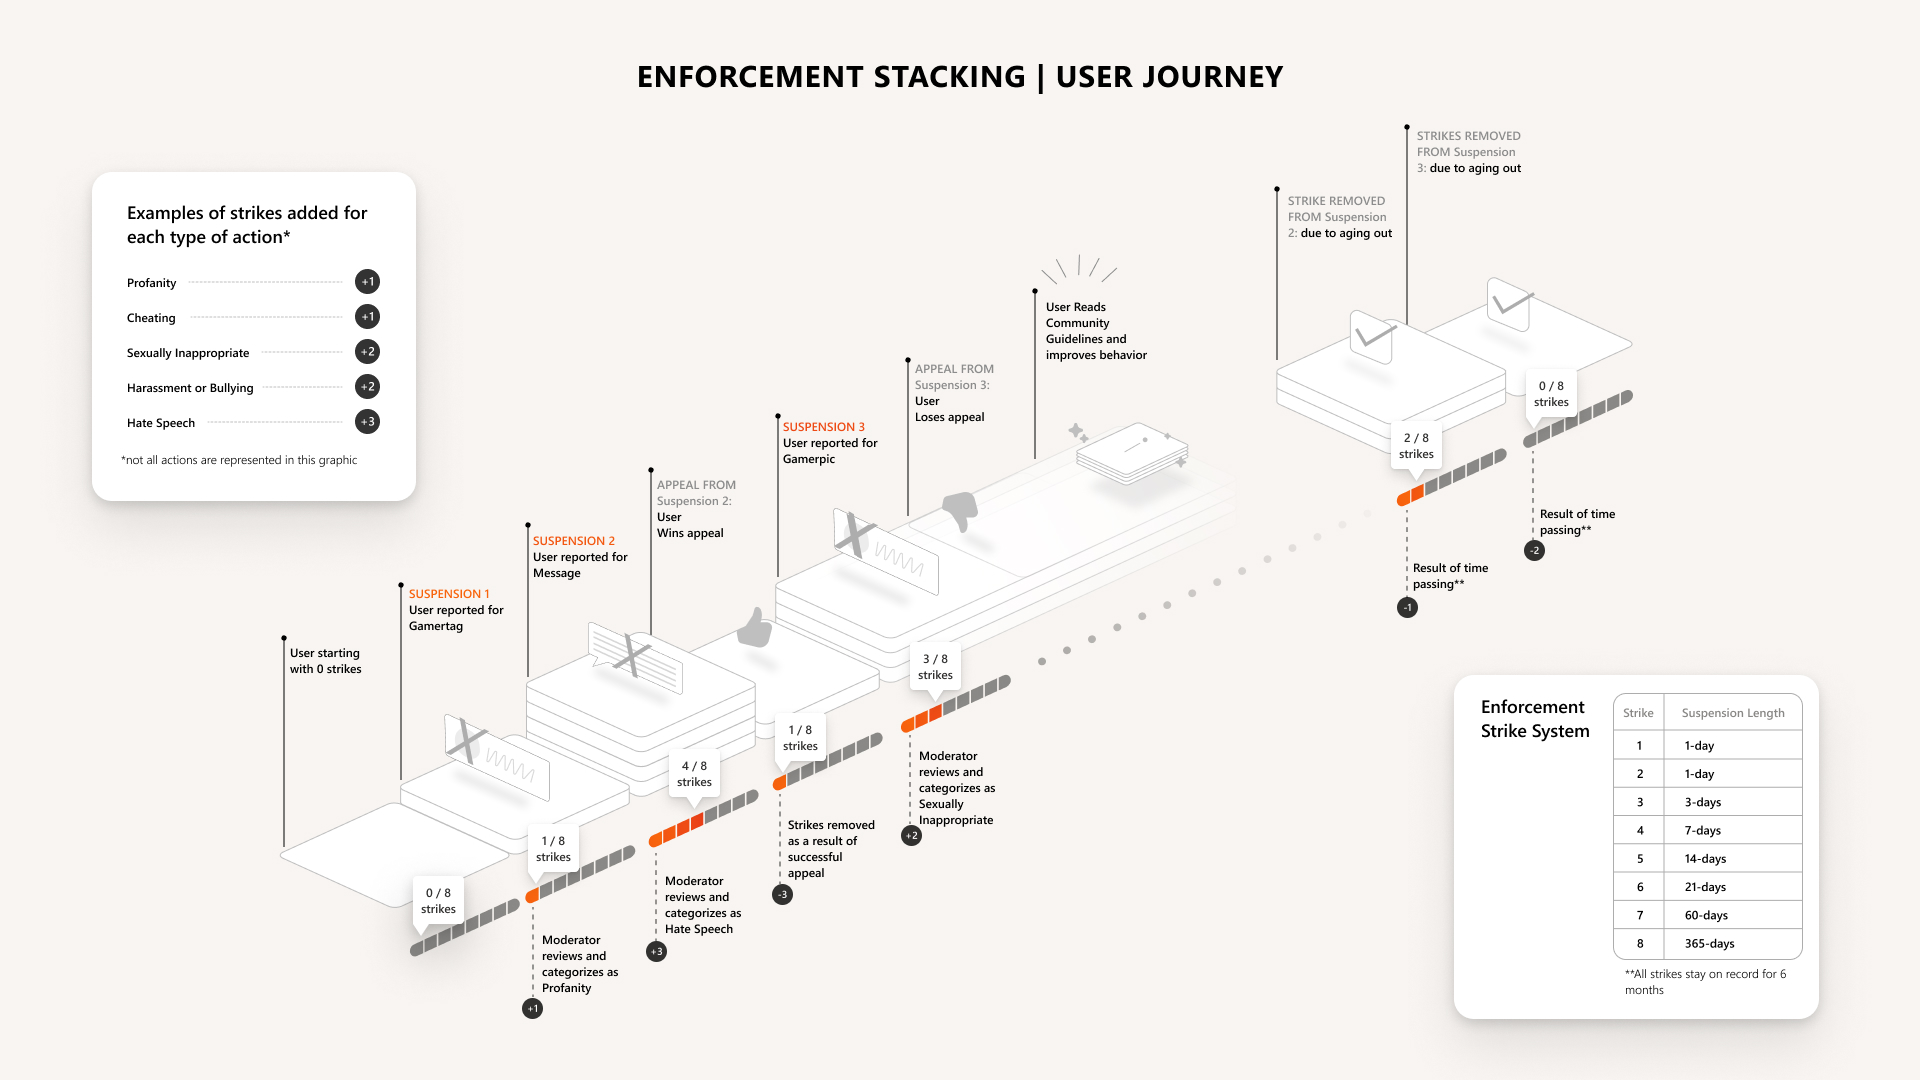 Enforcement_Stacking_User_Journey_Infographic_1920x1080-cde0f58d6138850cea87